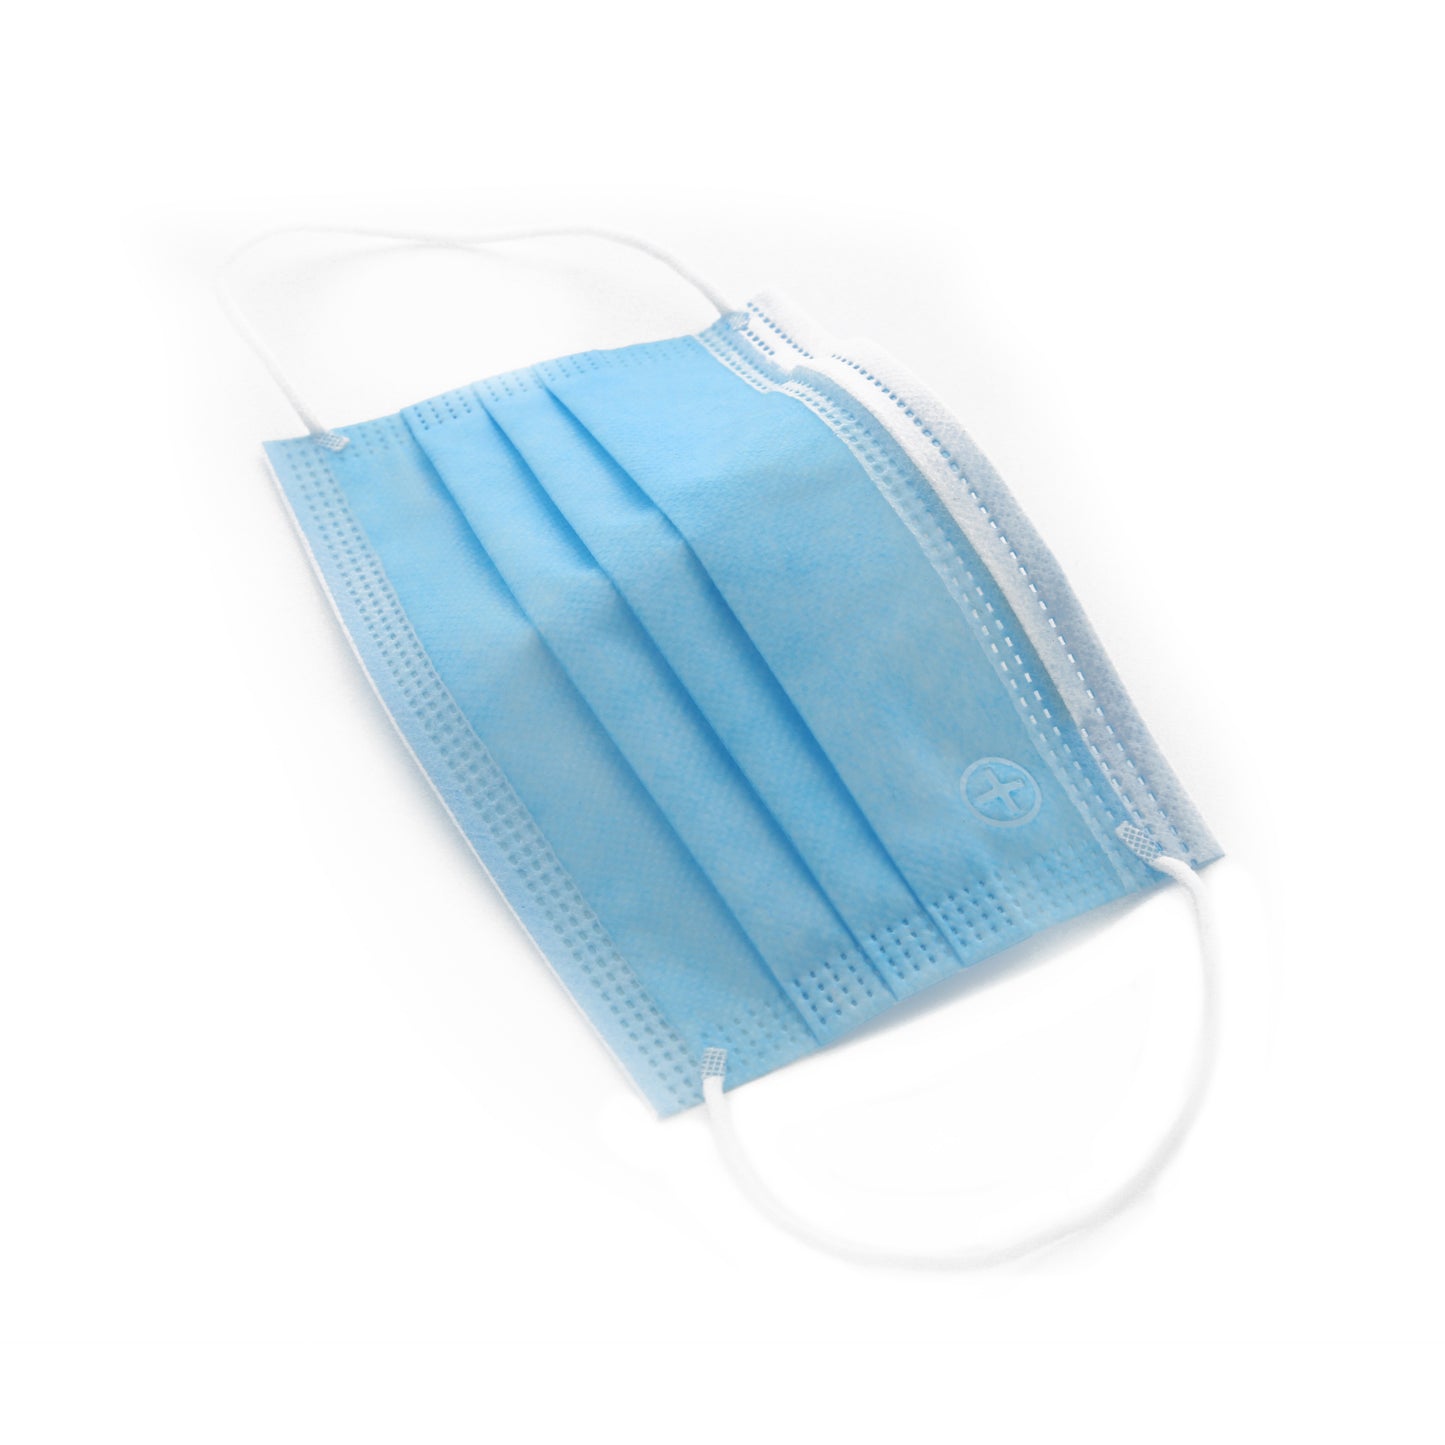 AmeriShield | USA Made 3-Ply Disposable Face Mask | ASTM Level 2